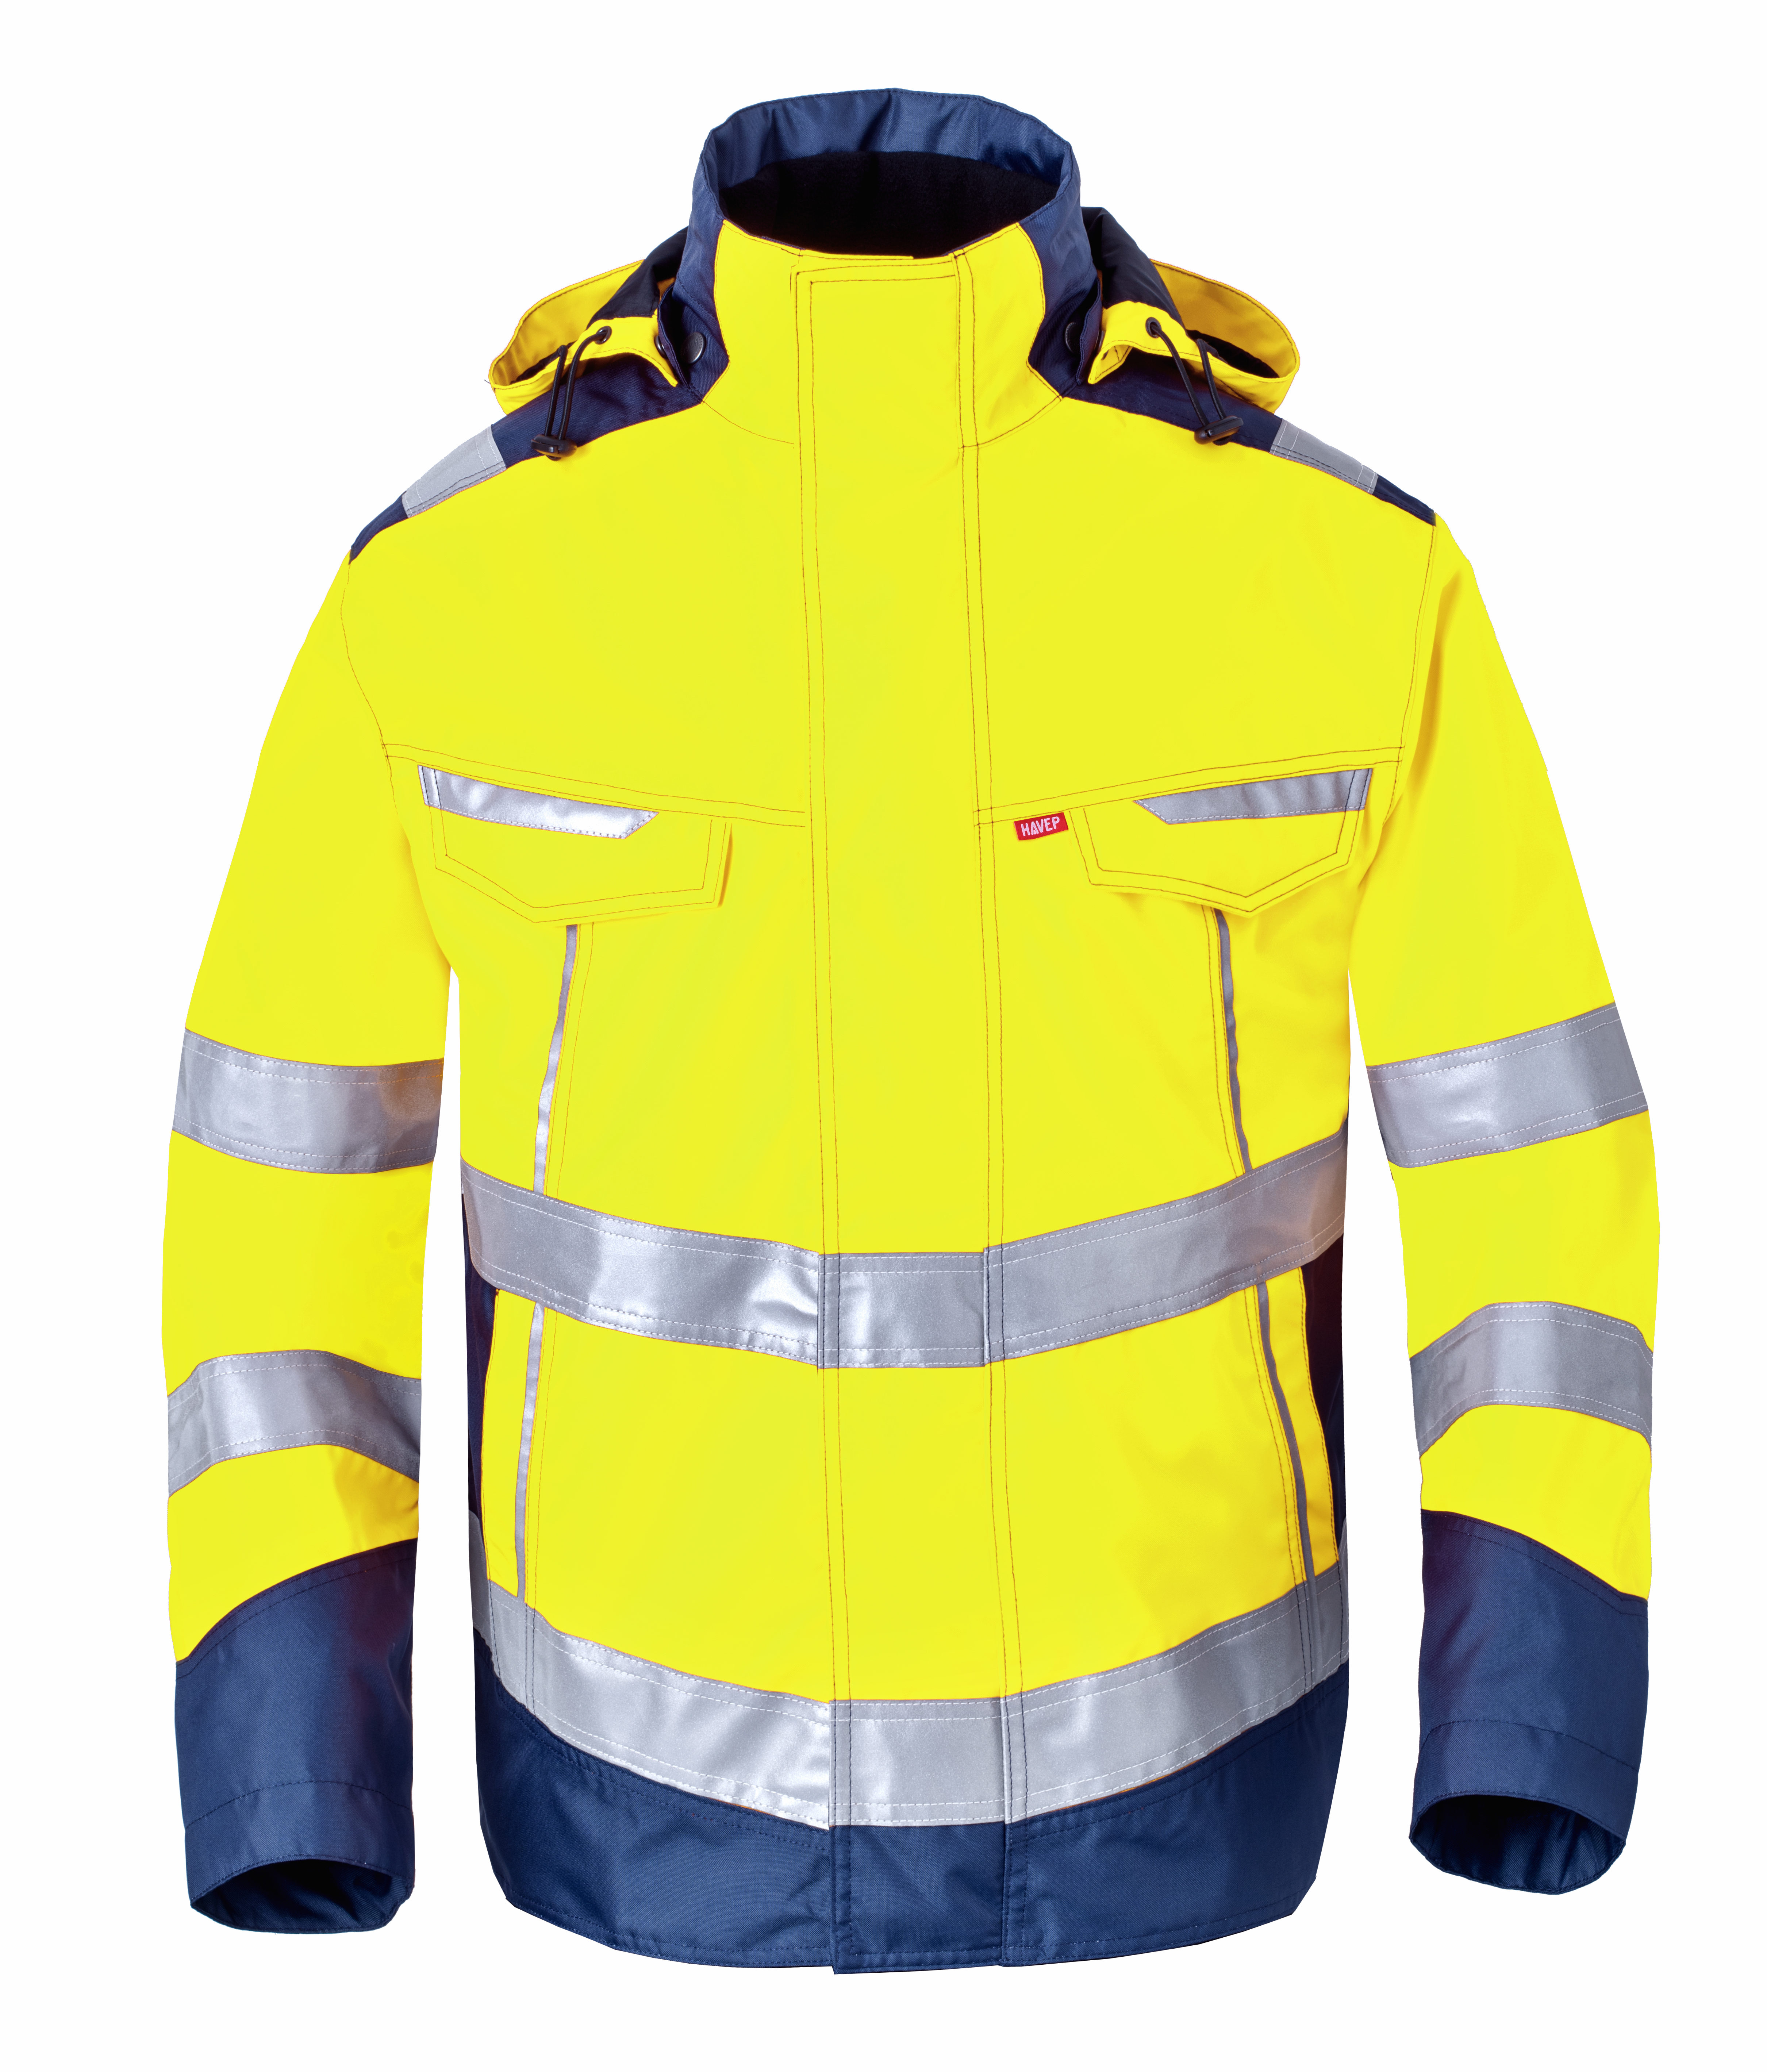 Havep High Visibility Excellence Jassen 50217 HiVis fluo geel-marine(ARB)